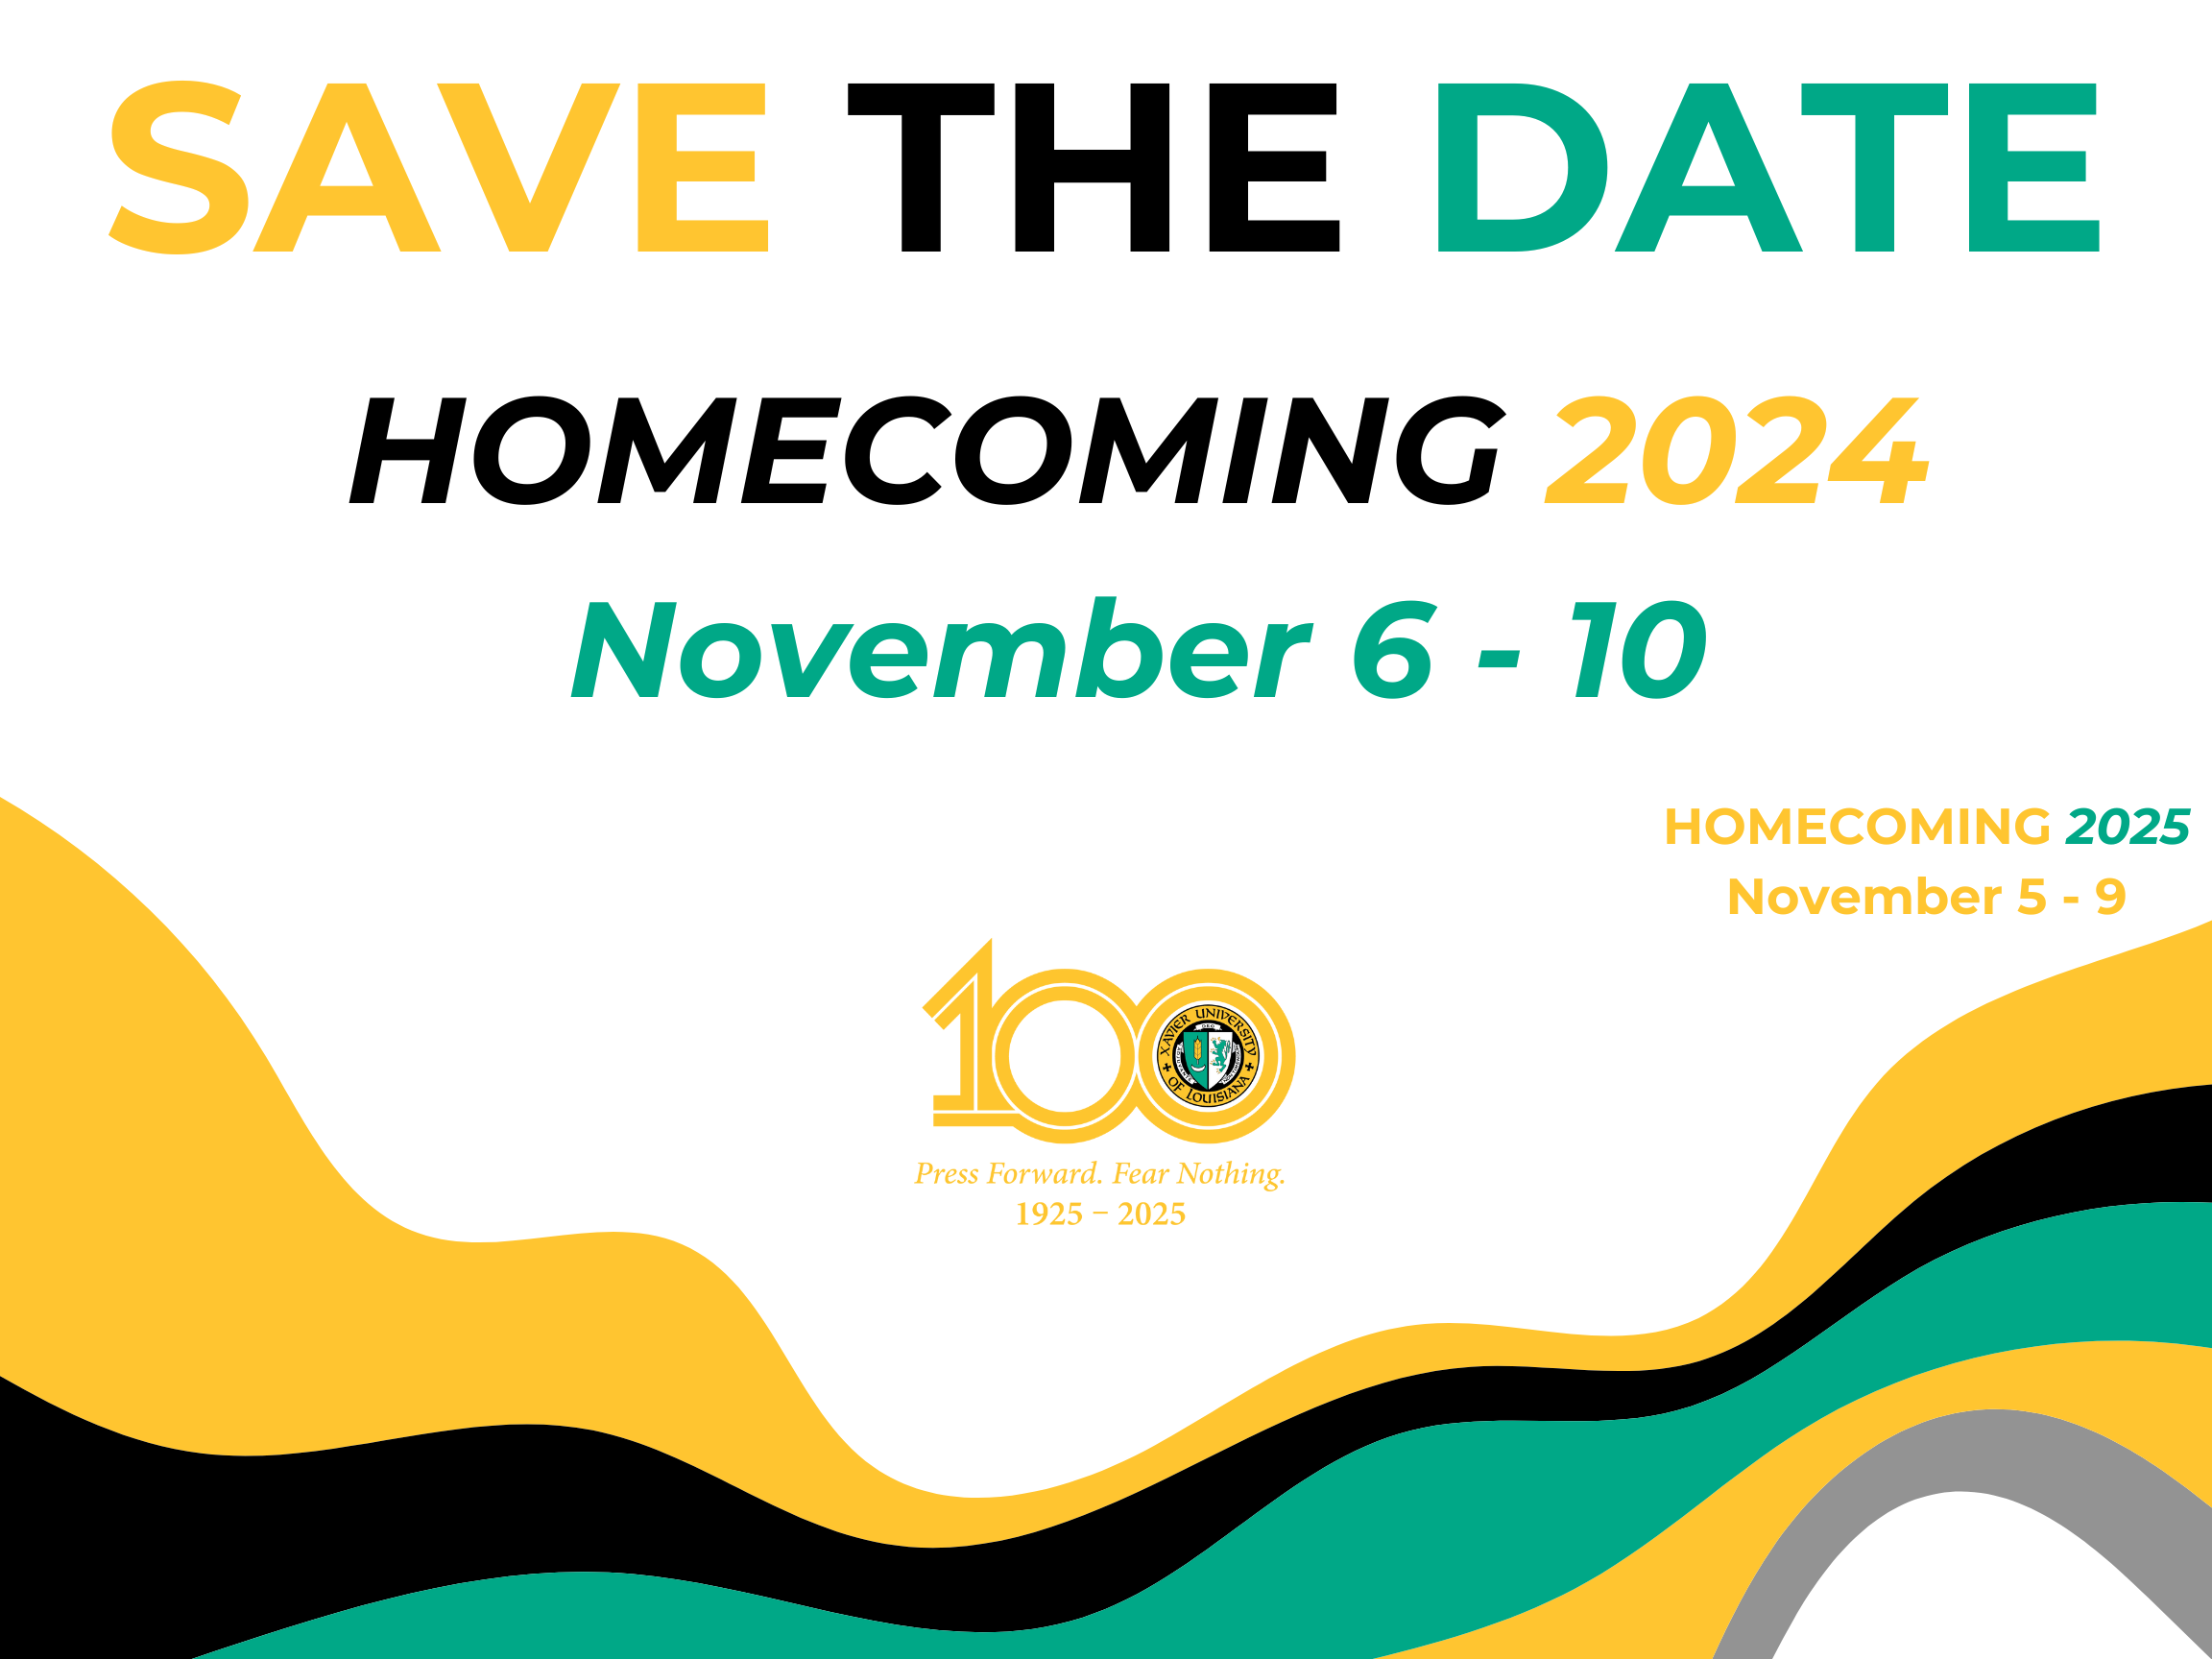 homecoming-save-the-date-1.png